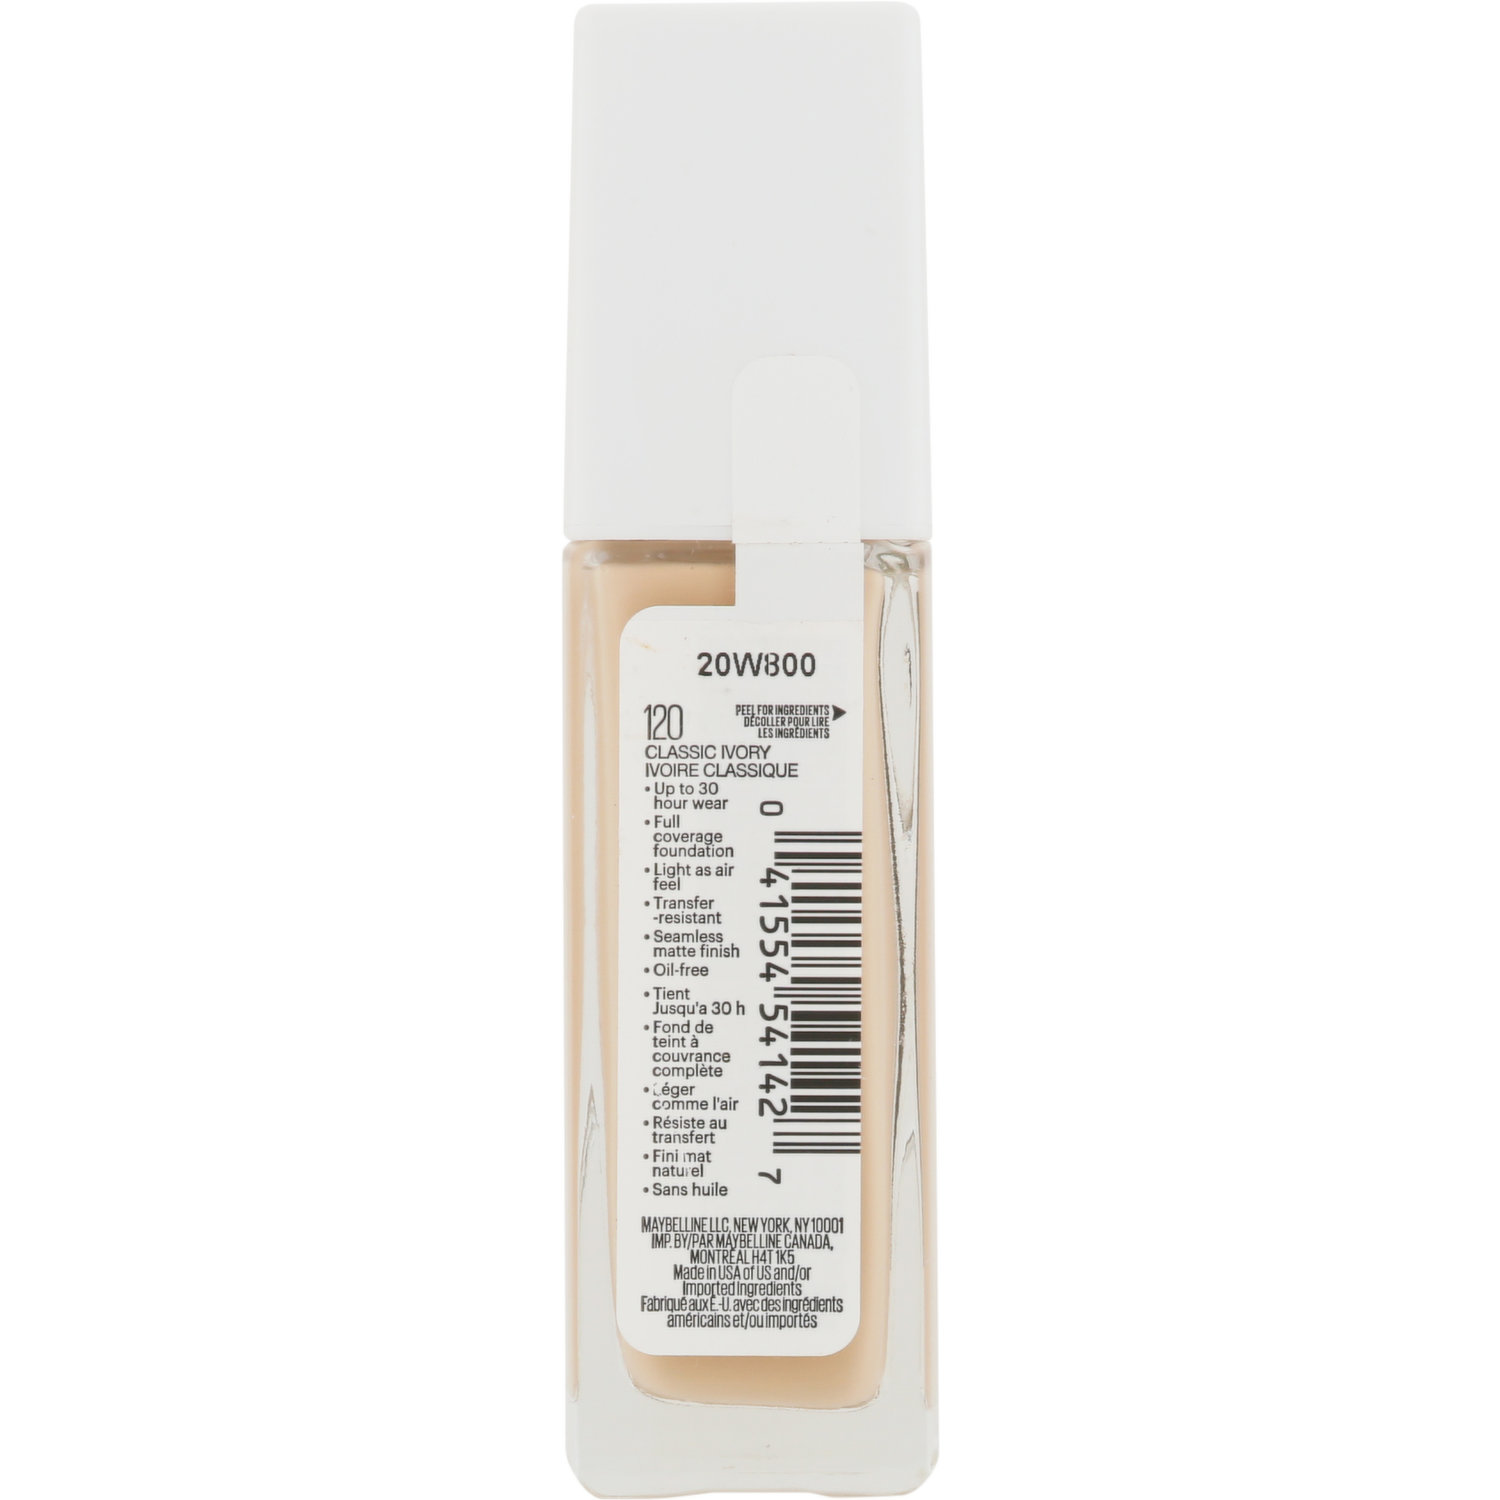 Base Maybelline Superstay Full Coverage 120 Classic Ivory